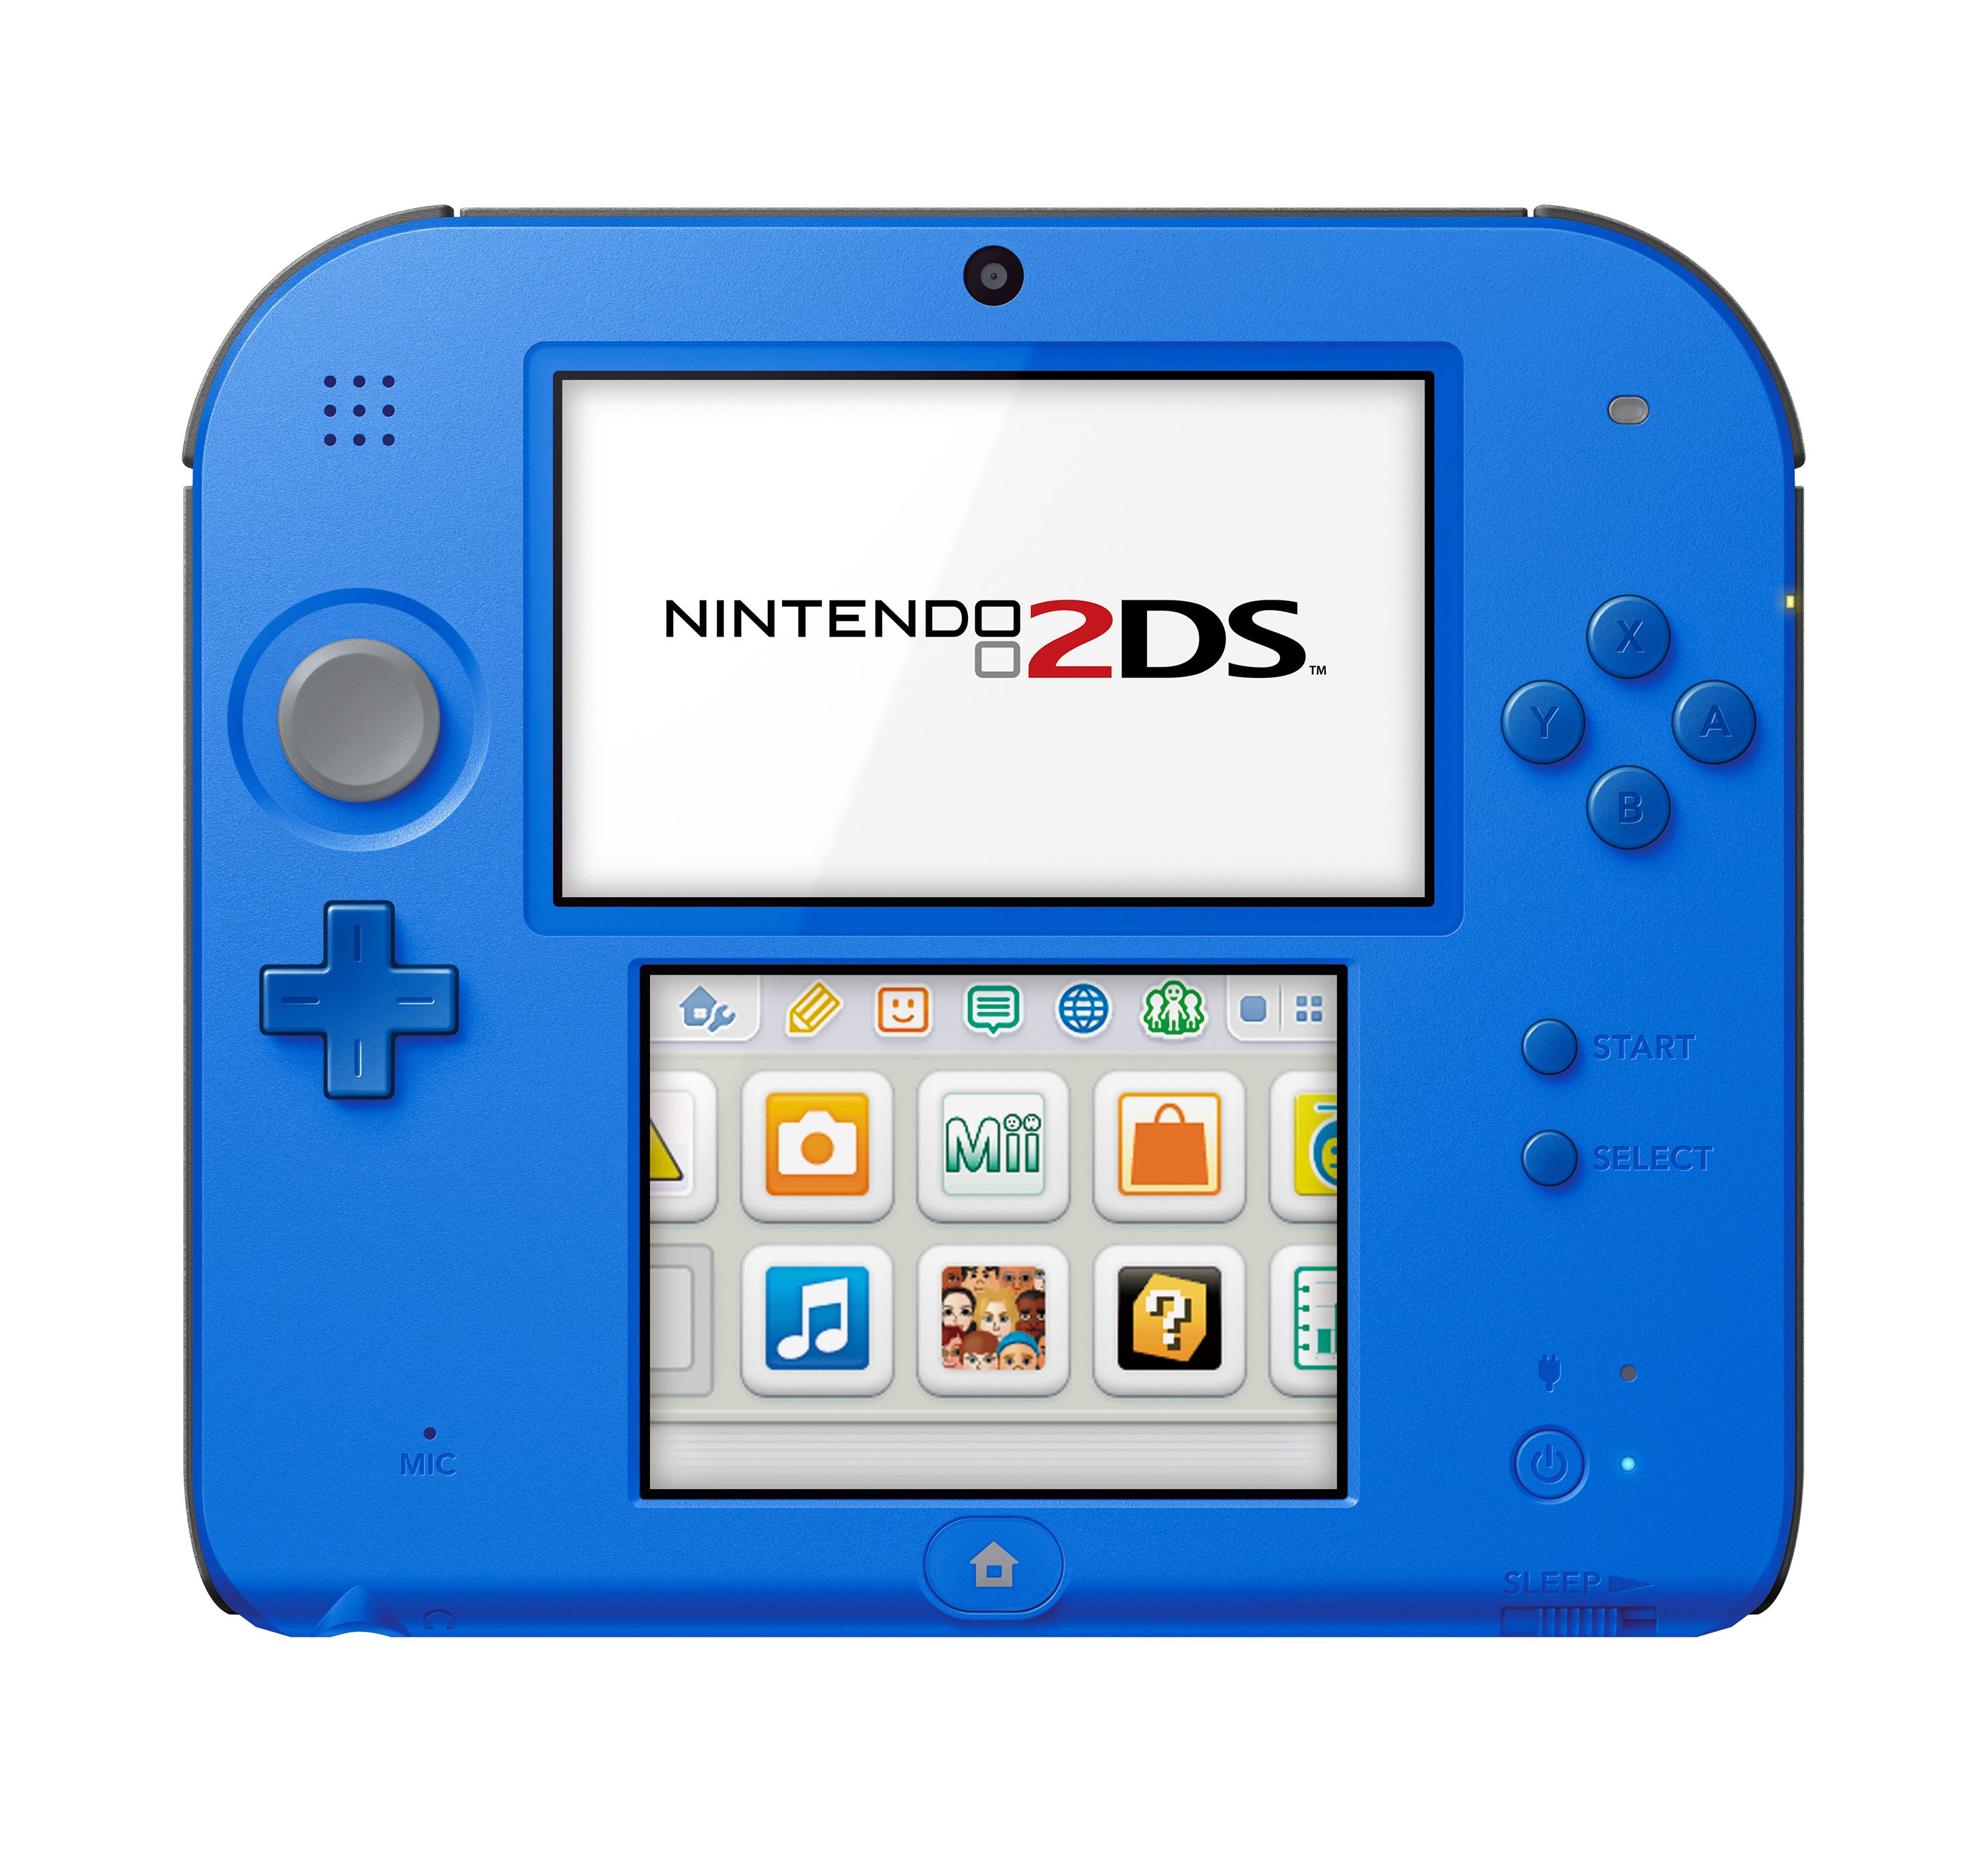 Nintendo 2DS System with New Super Mario 2, Blue - image 1 of 6